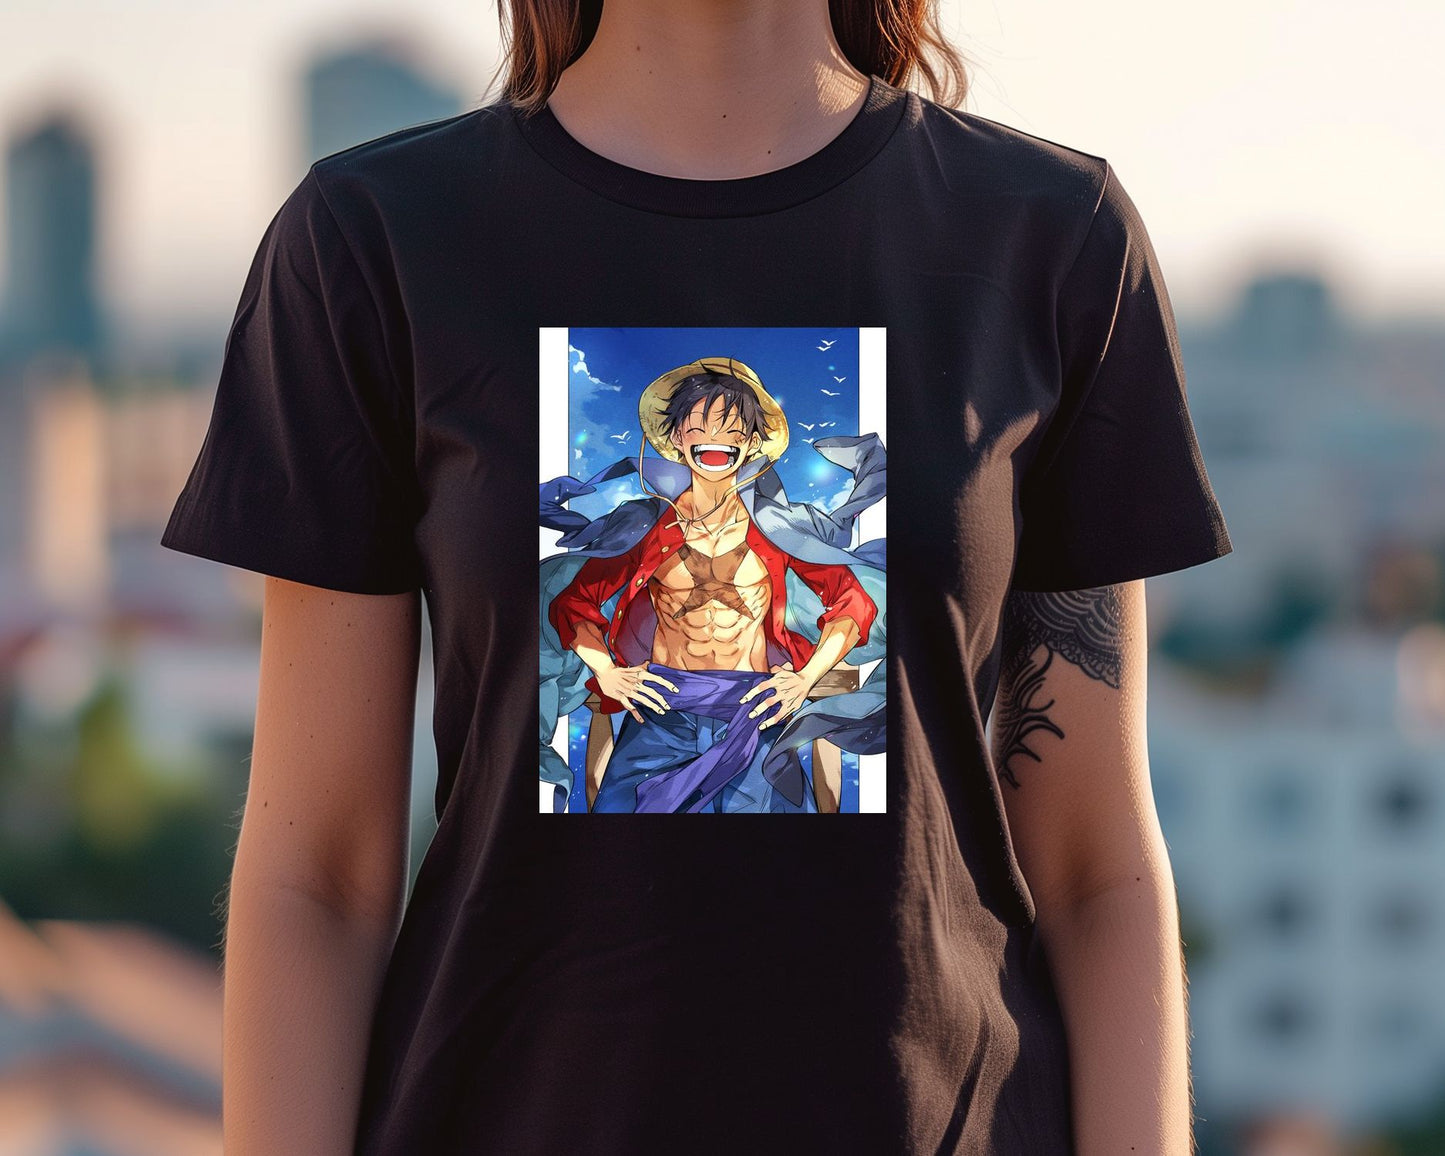 Luffy 3 - @UPGallery